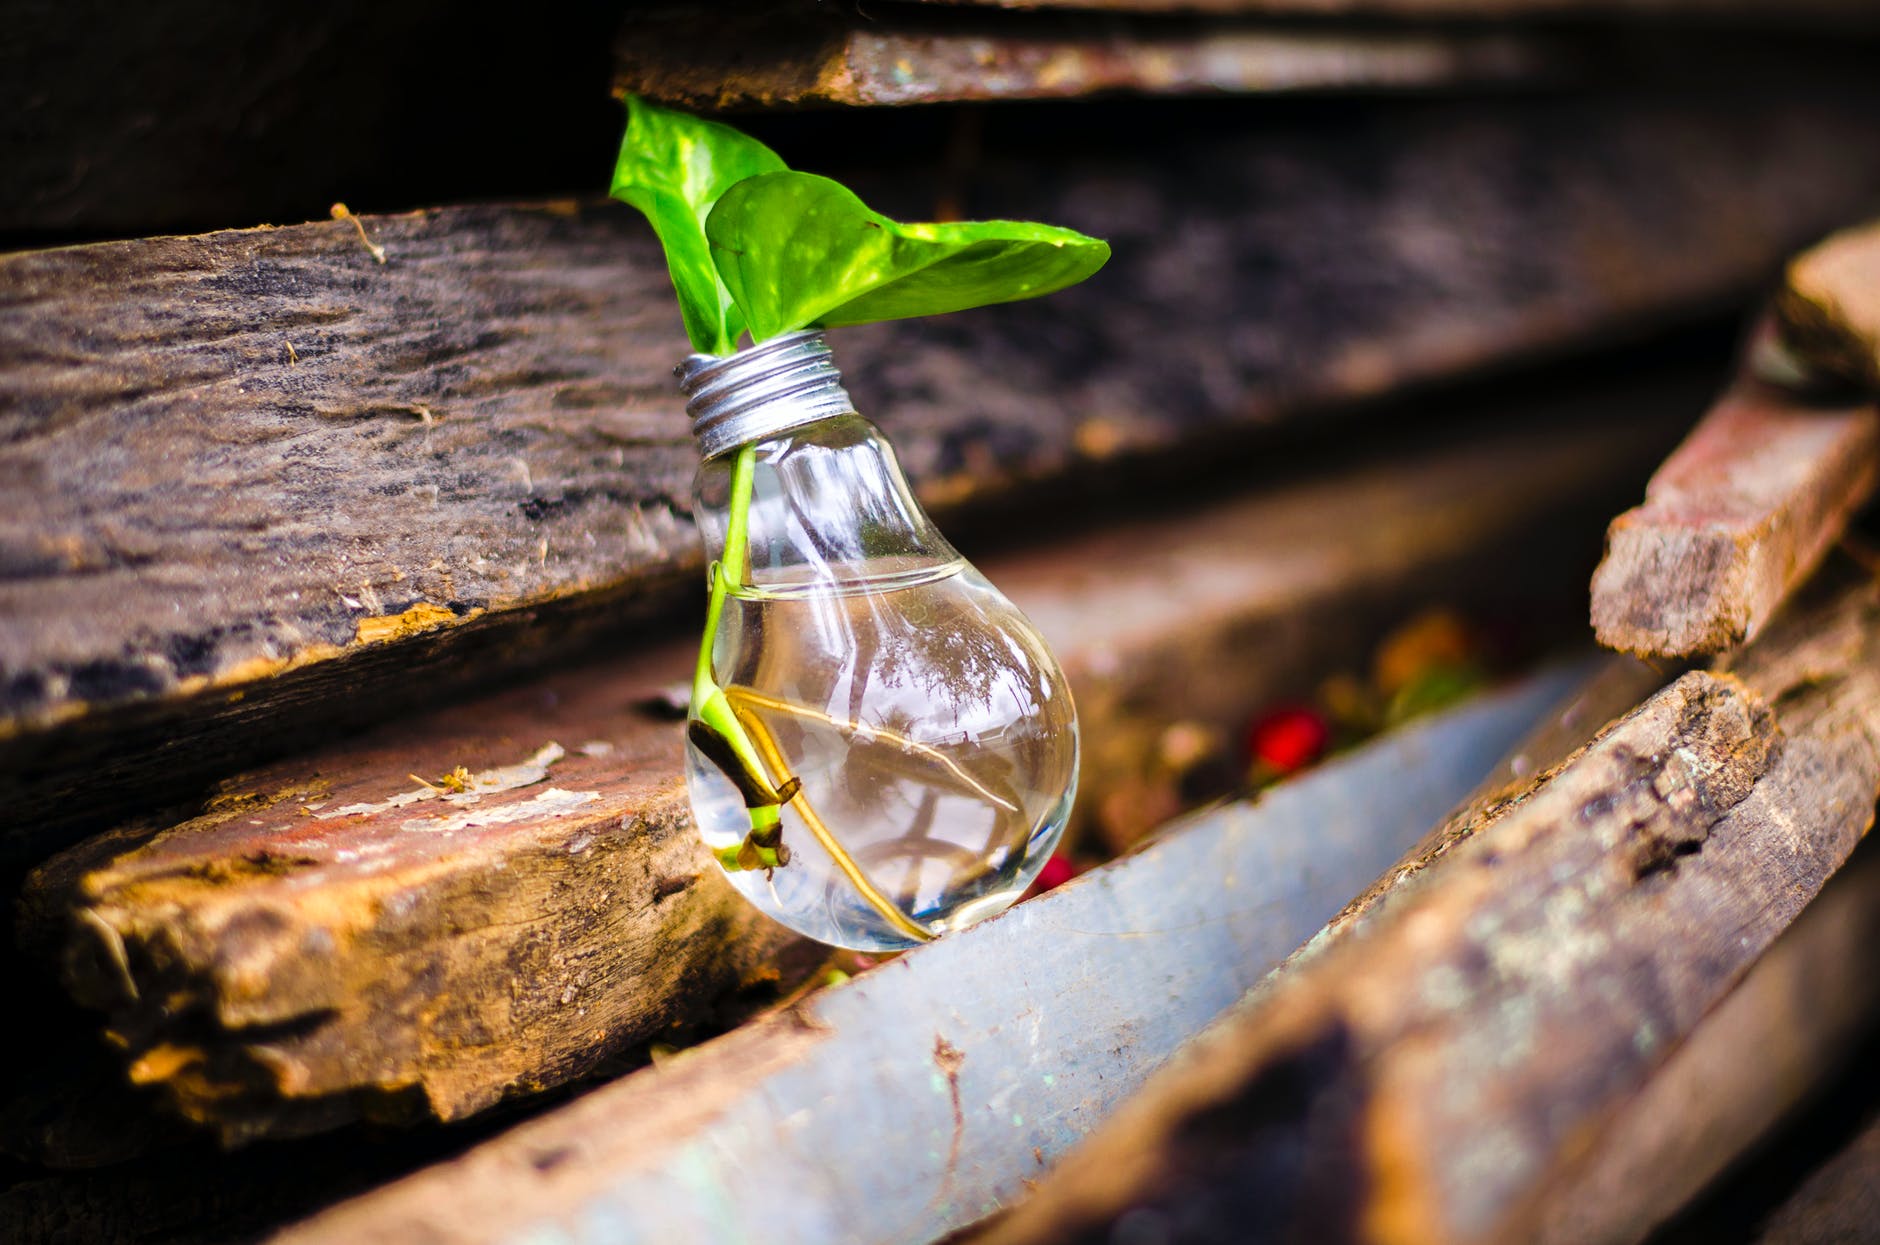 A lightbulb filled with water and being used as a plant pot. Symbolic of growing new ideas from unique places.